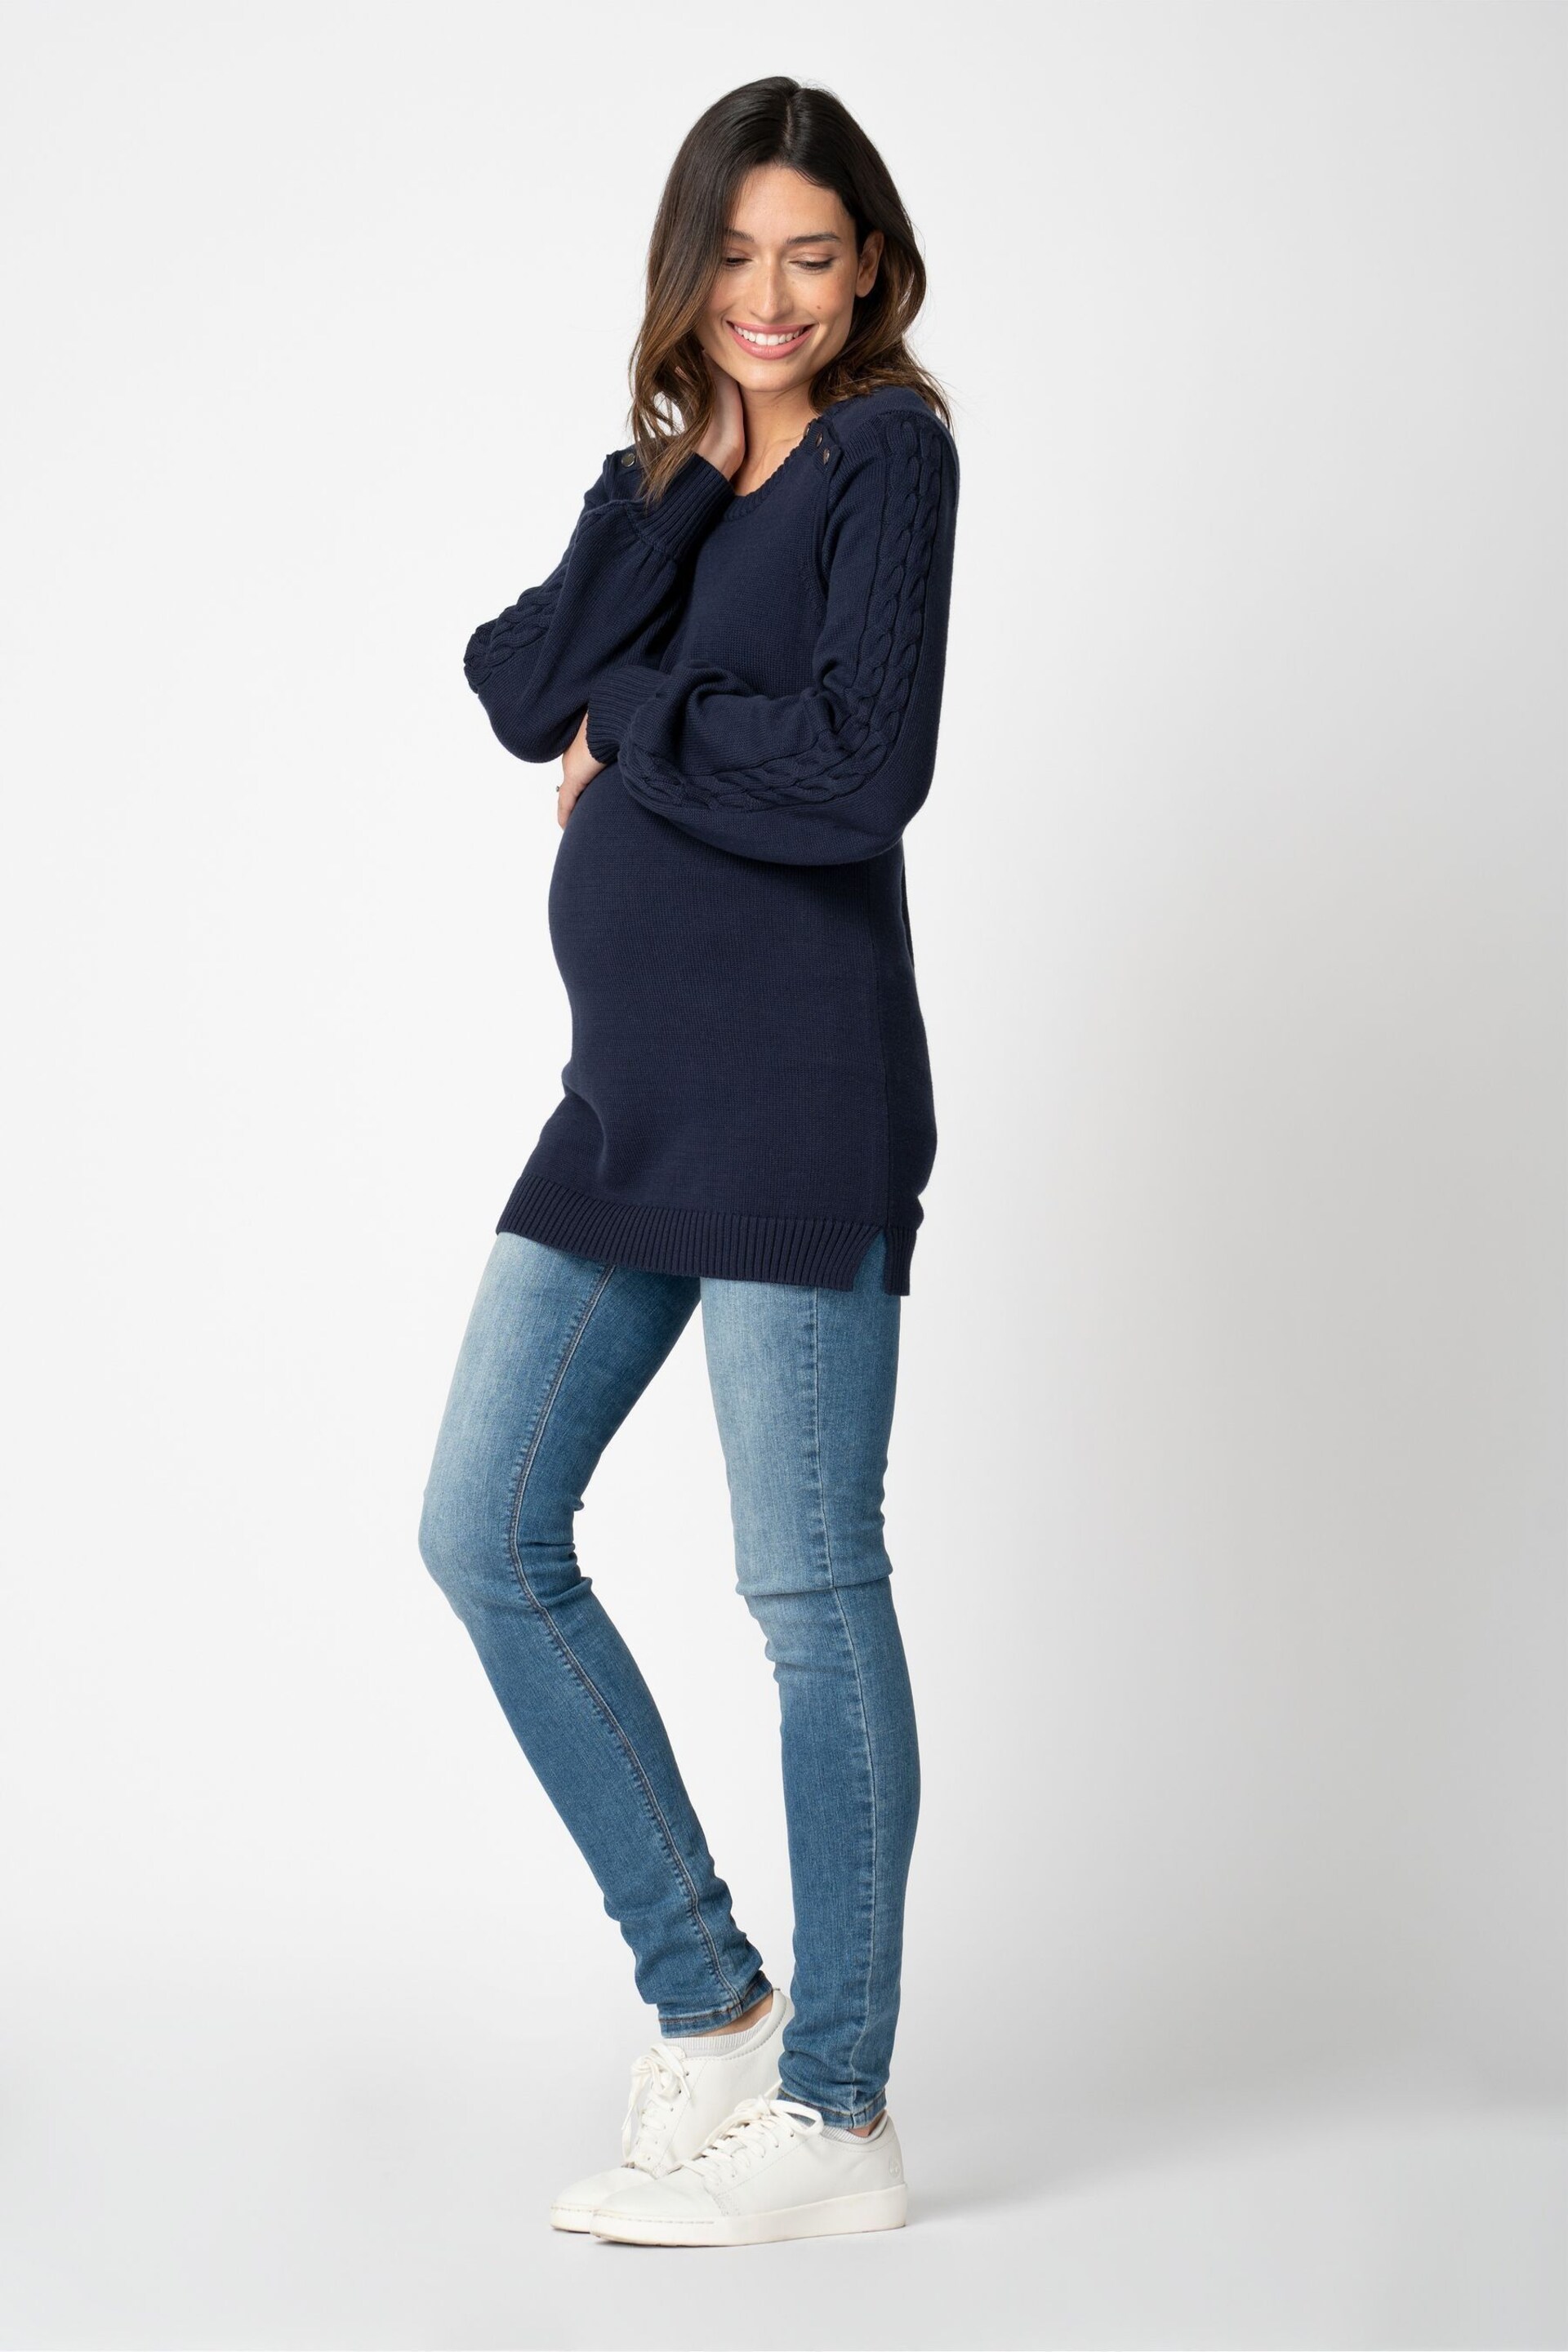 Seraphine Blue Bell Sleeve Cable Detail Nursing Jumper - Image 1 of 4